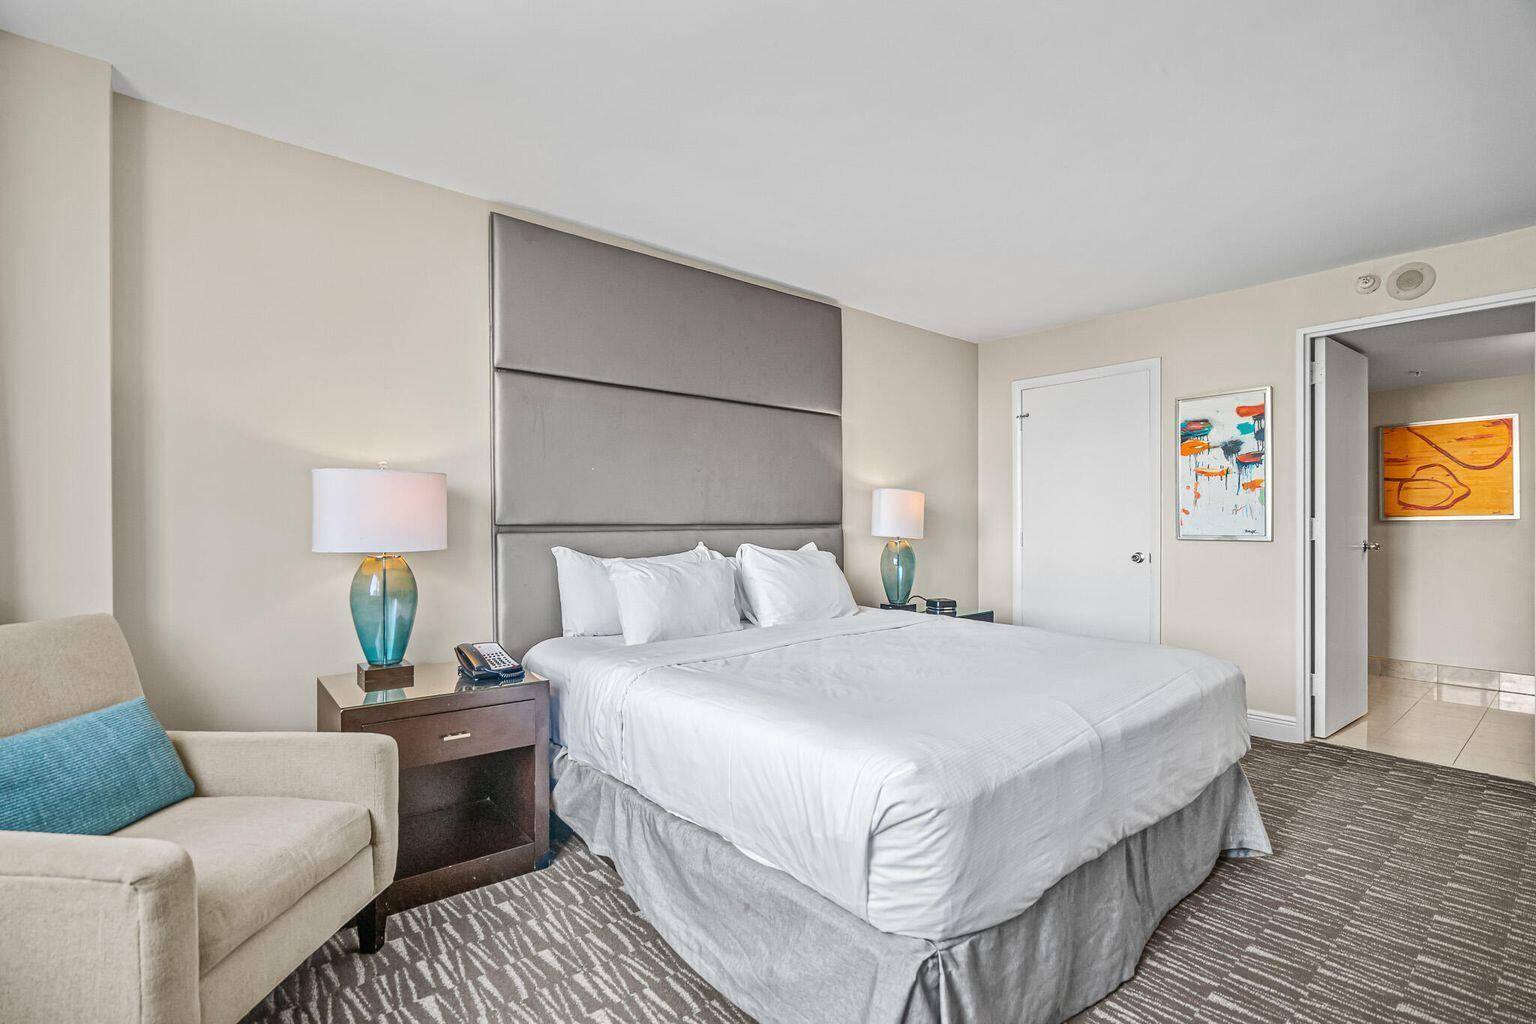 Wake up to amazing views of the intracoastal and the ocean from your 1 bedroom, 1 bathroom Suite.